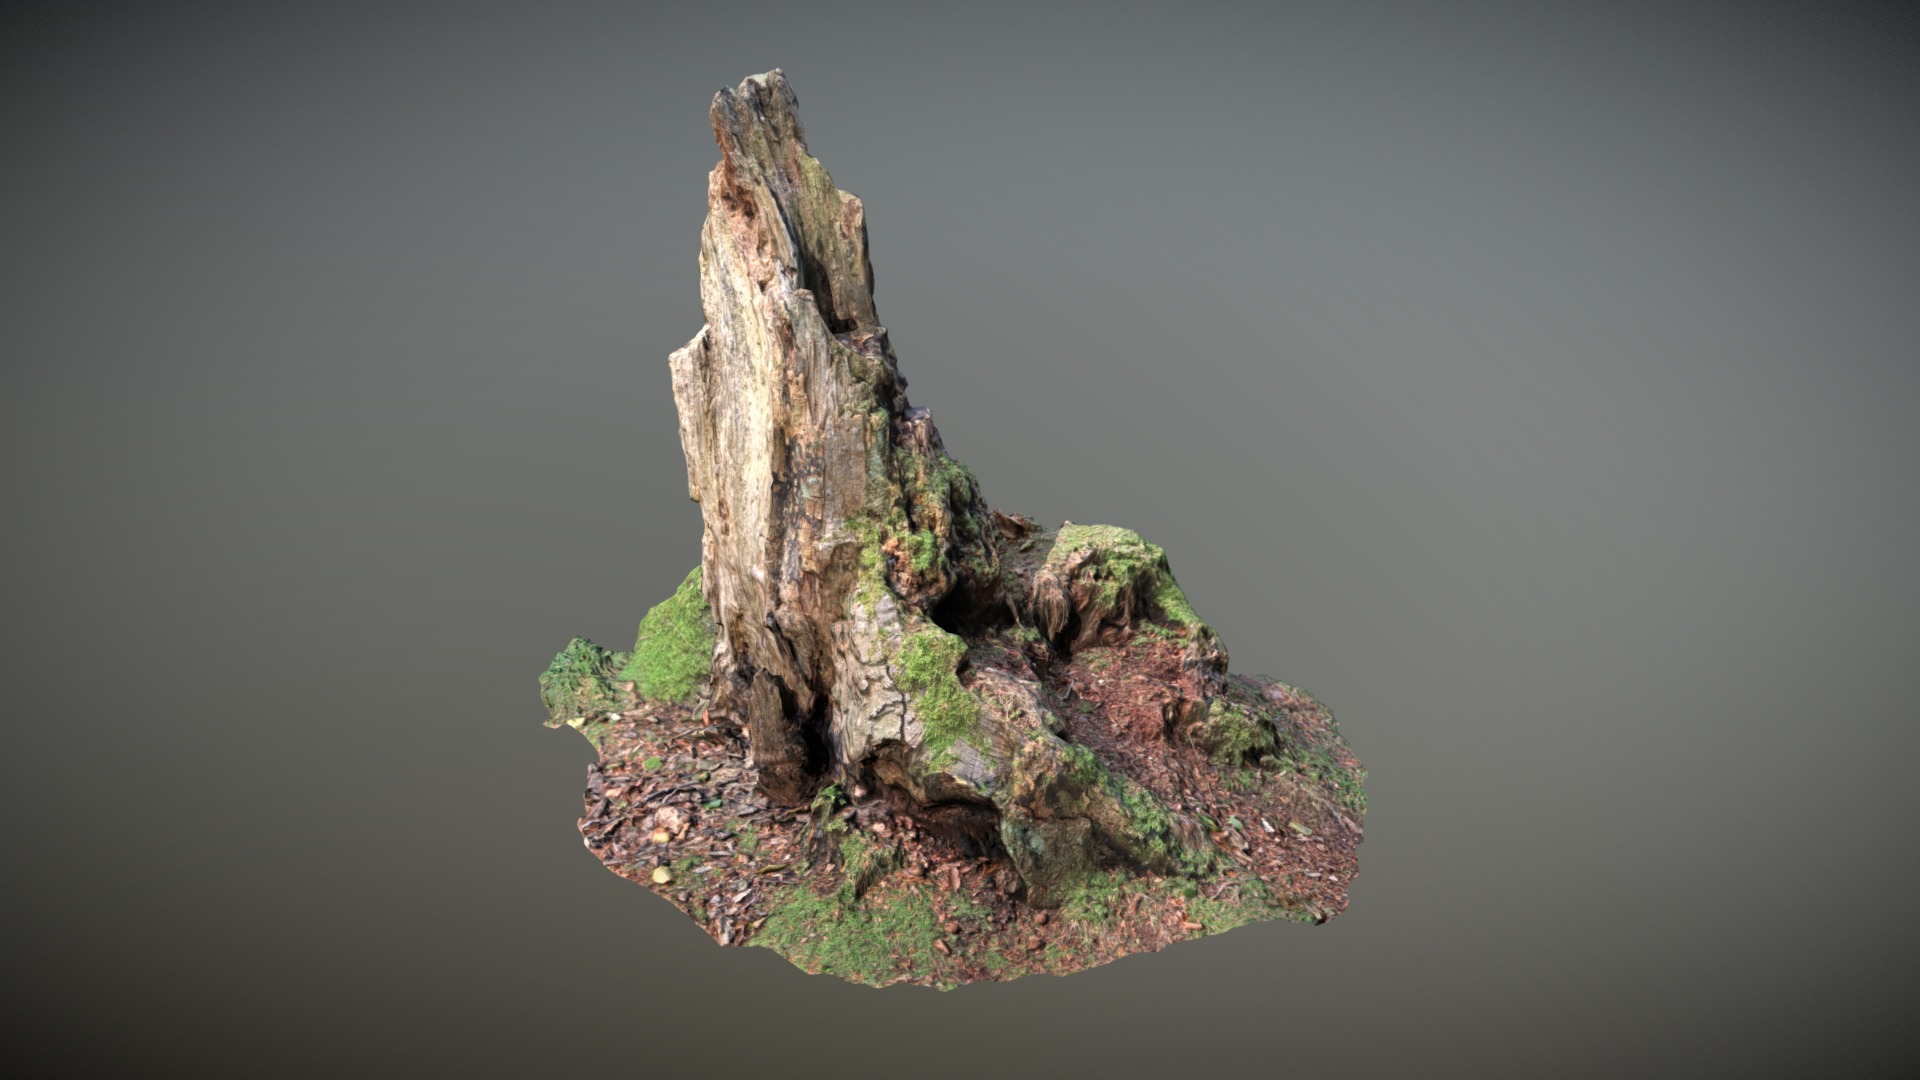 3D model Nature Stump 010 - This is a 3D model of the Nature Stump 010. The 3D model is about a tree stump with moss growing on it.